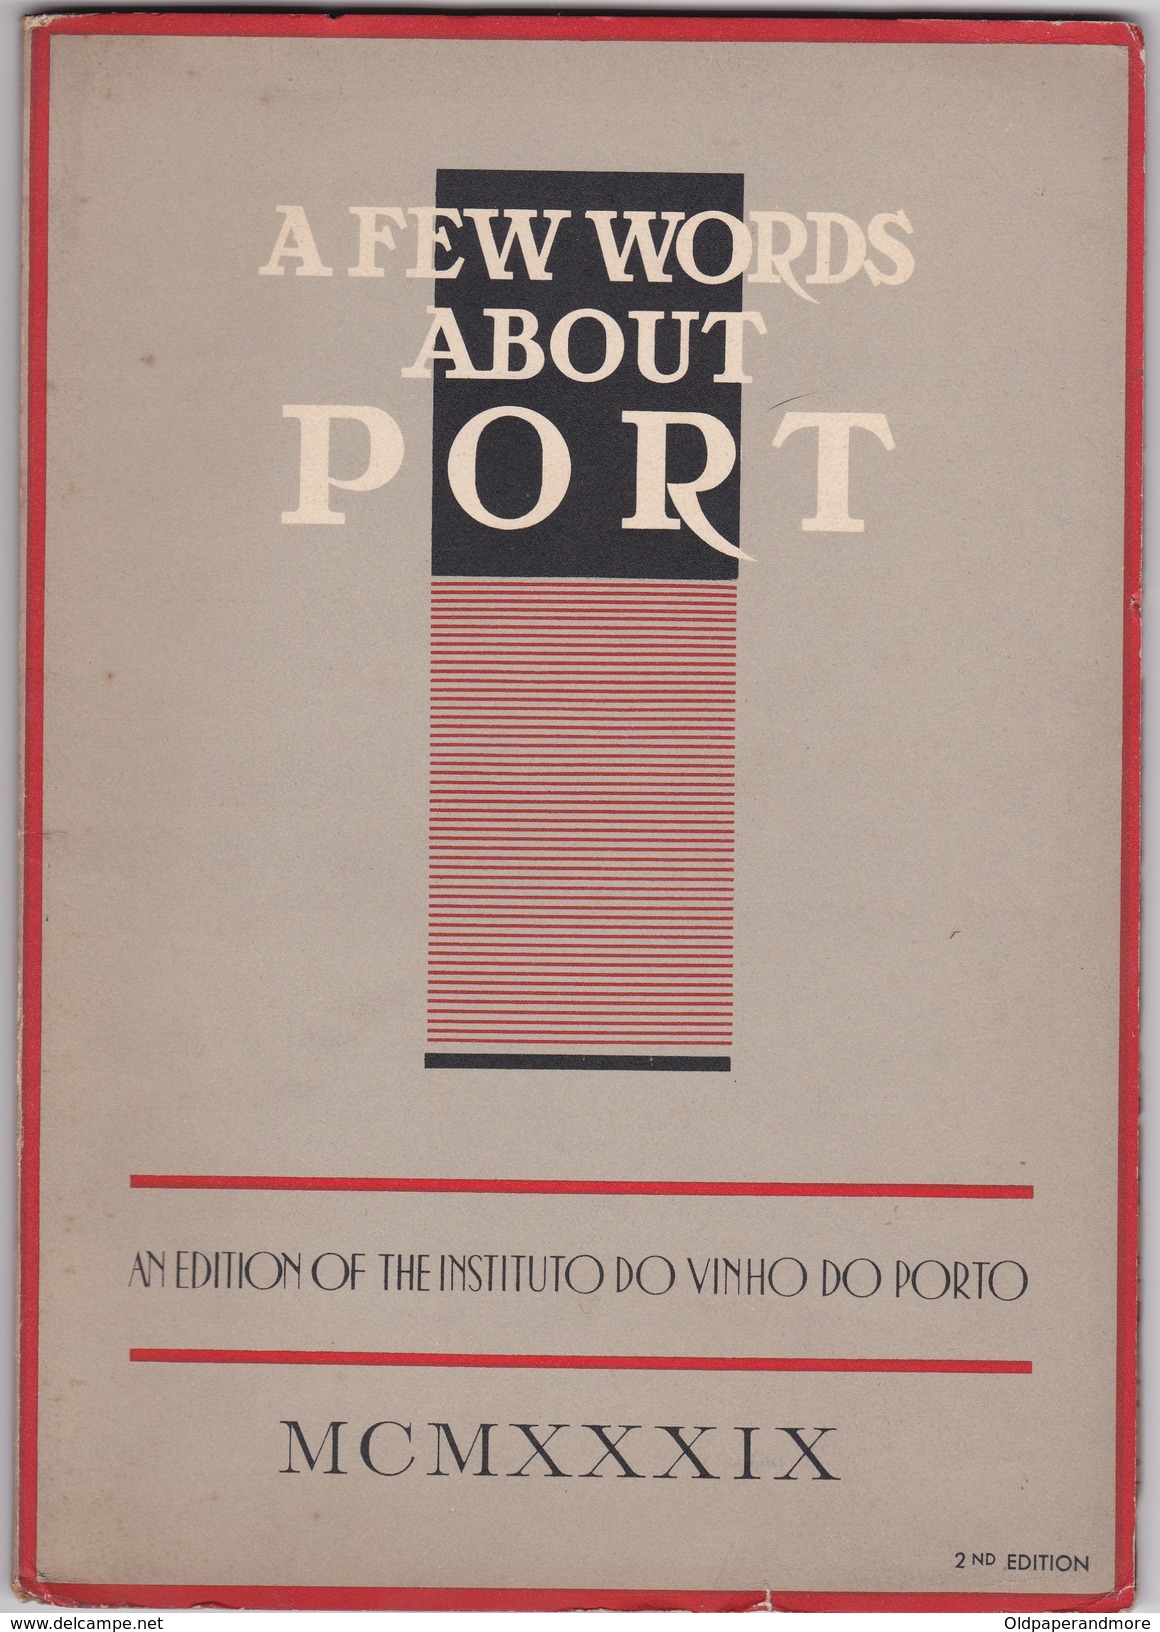 PORTUGAL - A FEW WORDS ABOUT PORT - AN EDITION OF THE INSTITUTO DO VINHO DO PORTO 1939 - WINE - VINO - 2nd EDITION - Europa